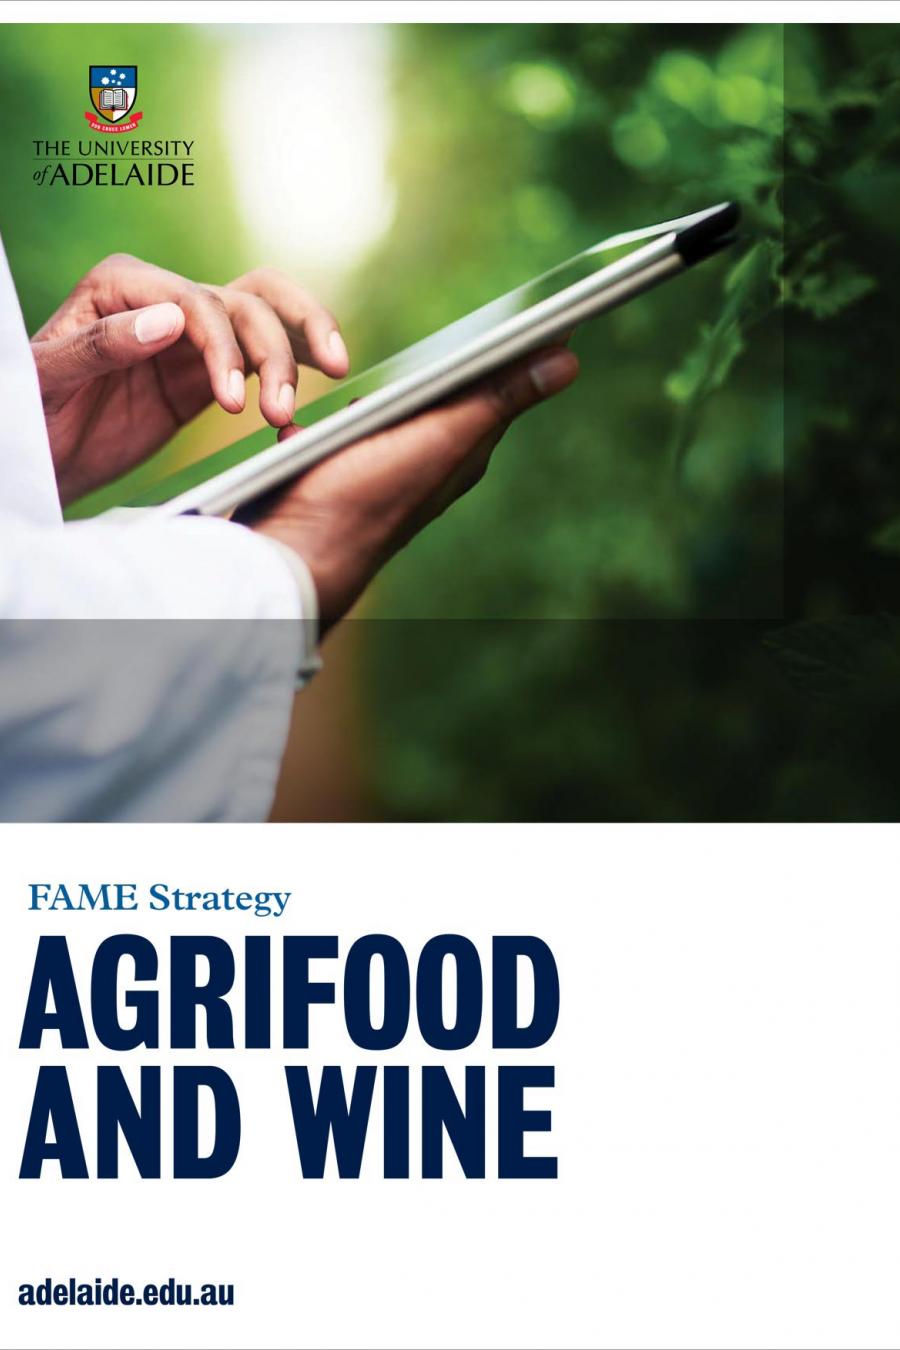 FAME Strategy - Agrifood and Wine